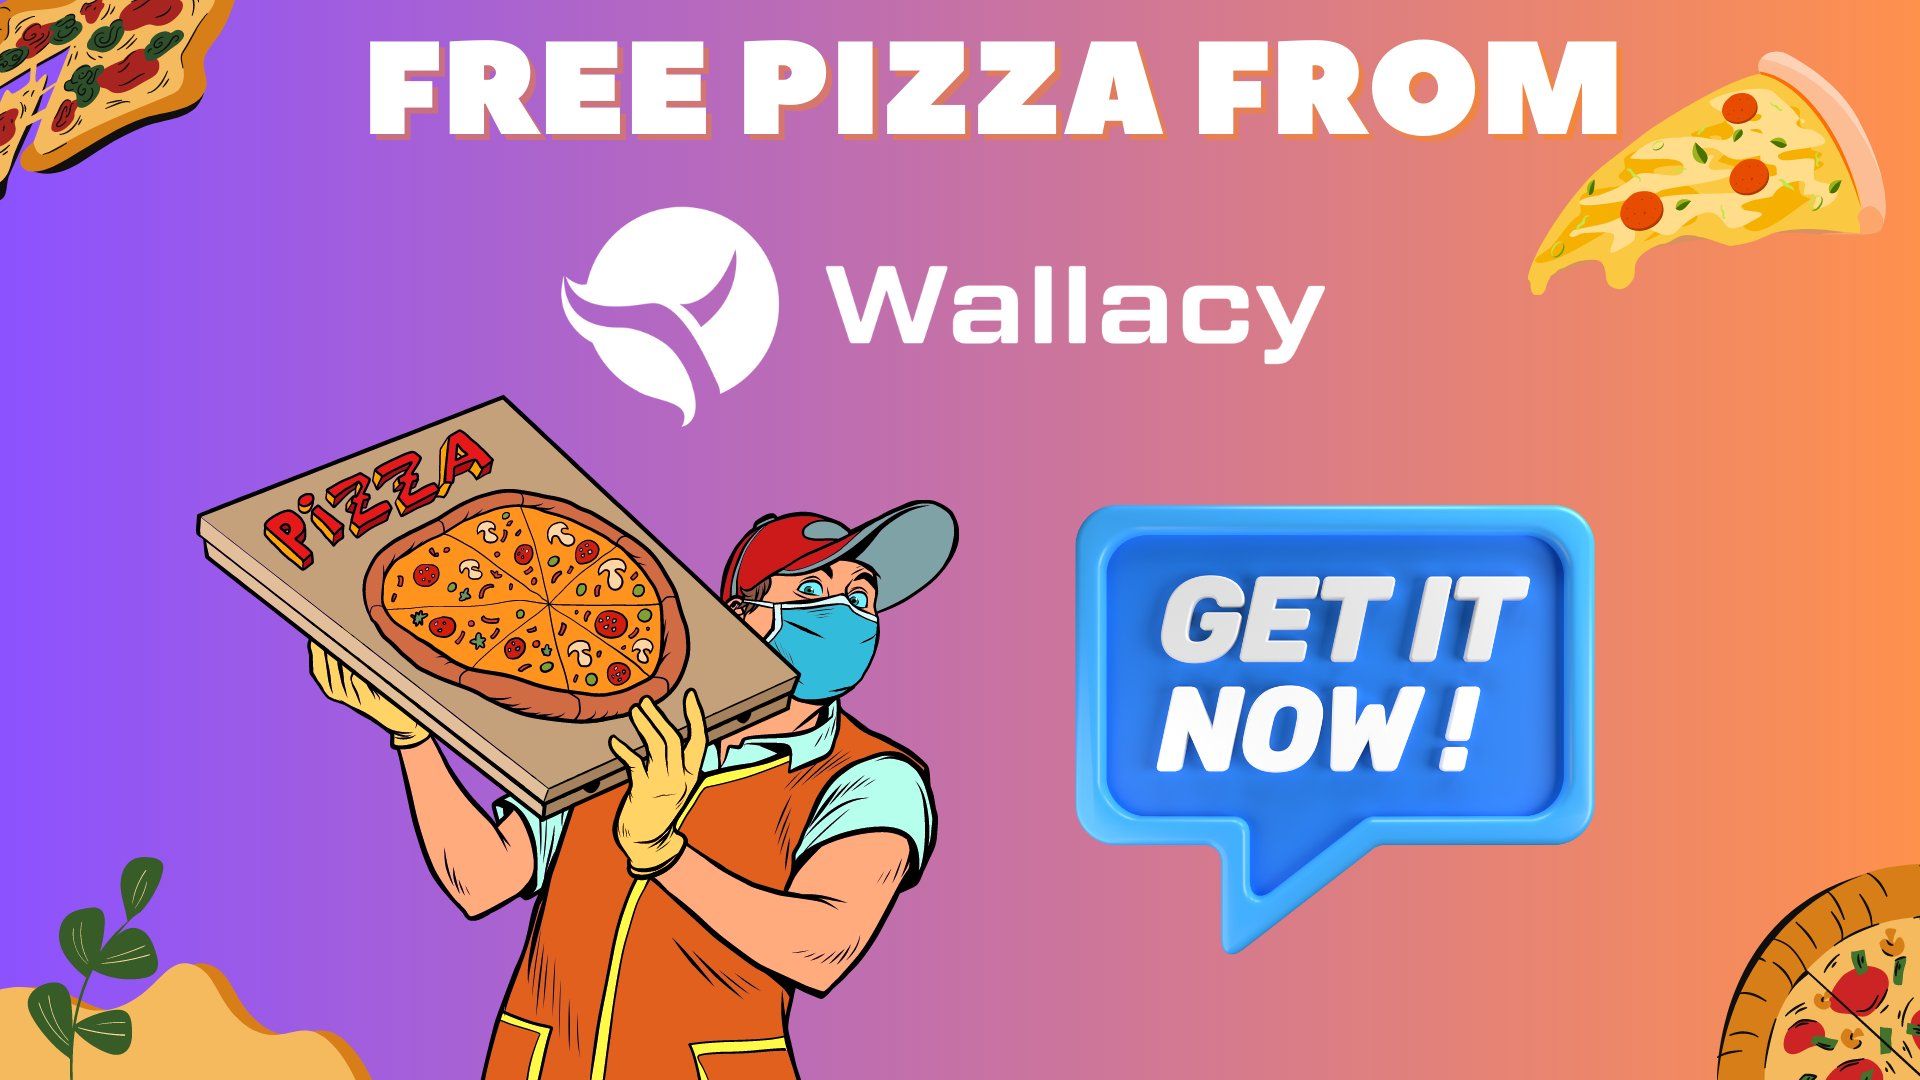 MINI EVENT FOR BITCOIN PIZZA DAY: FREE PIZZA FROM WALLACY 